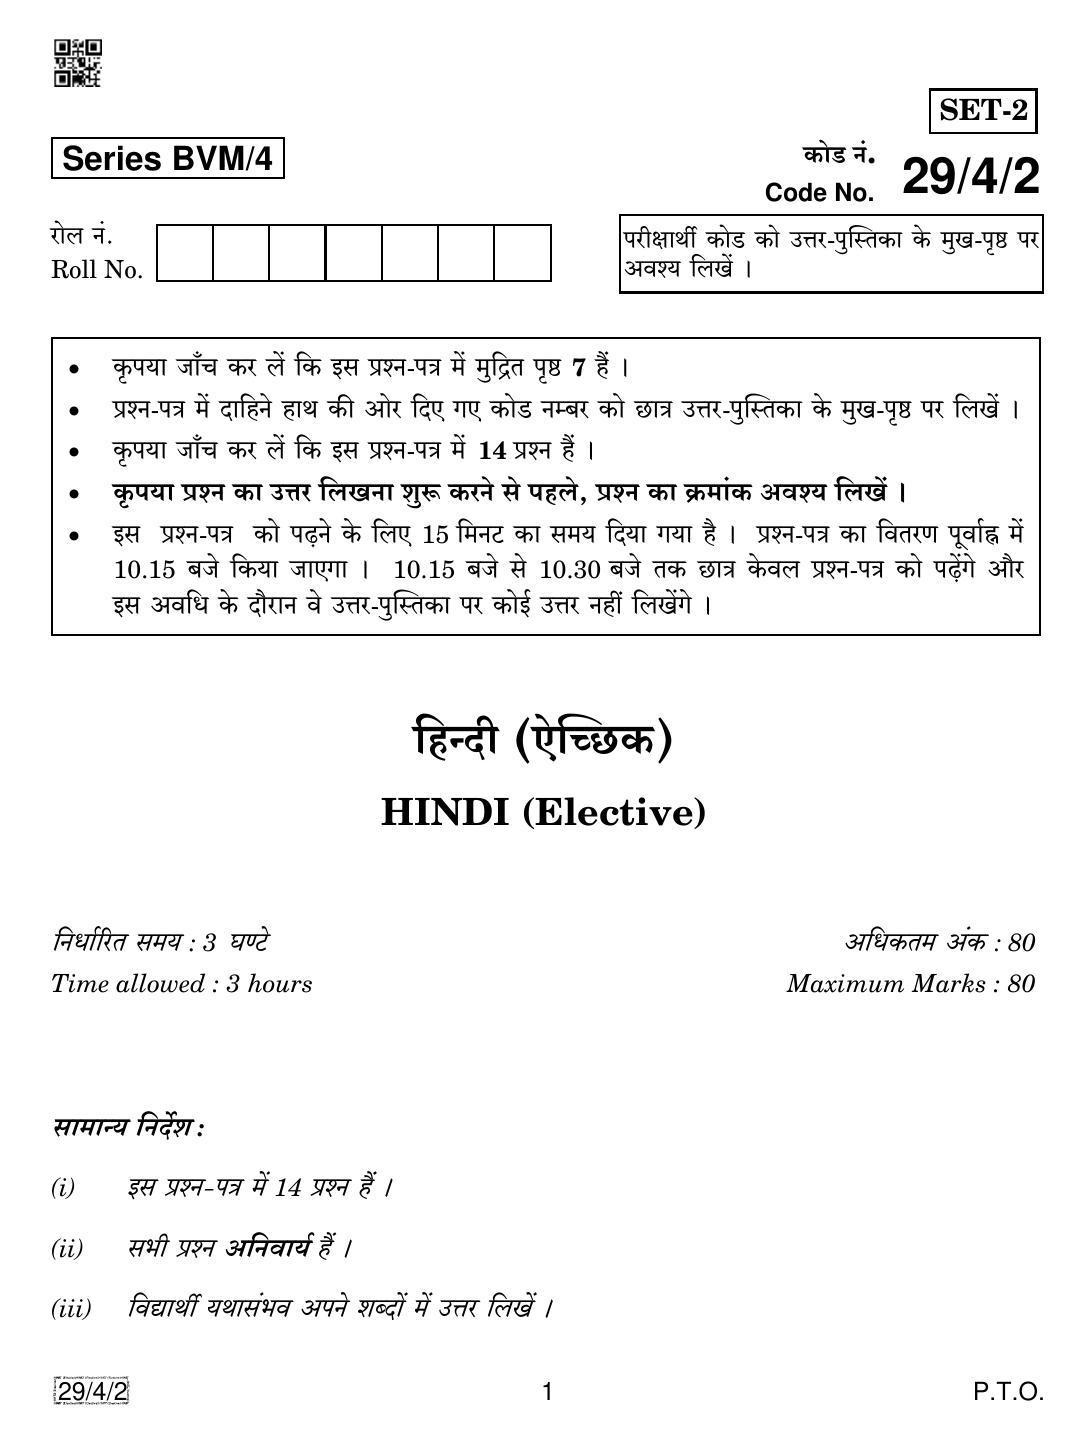 CBSE Class 12 29-4-2 Hindi Elective 2019 Question Paper - Page 1